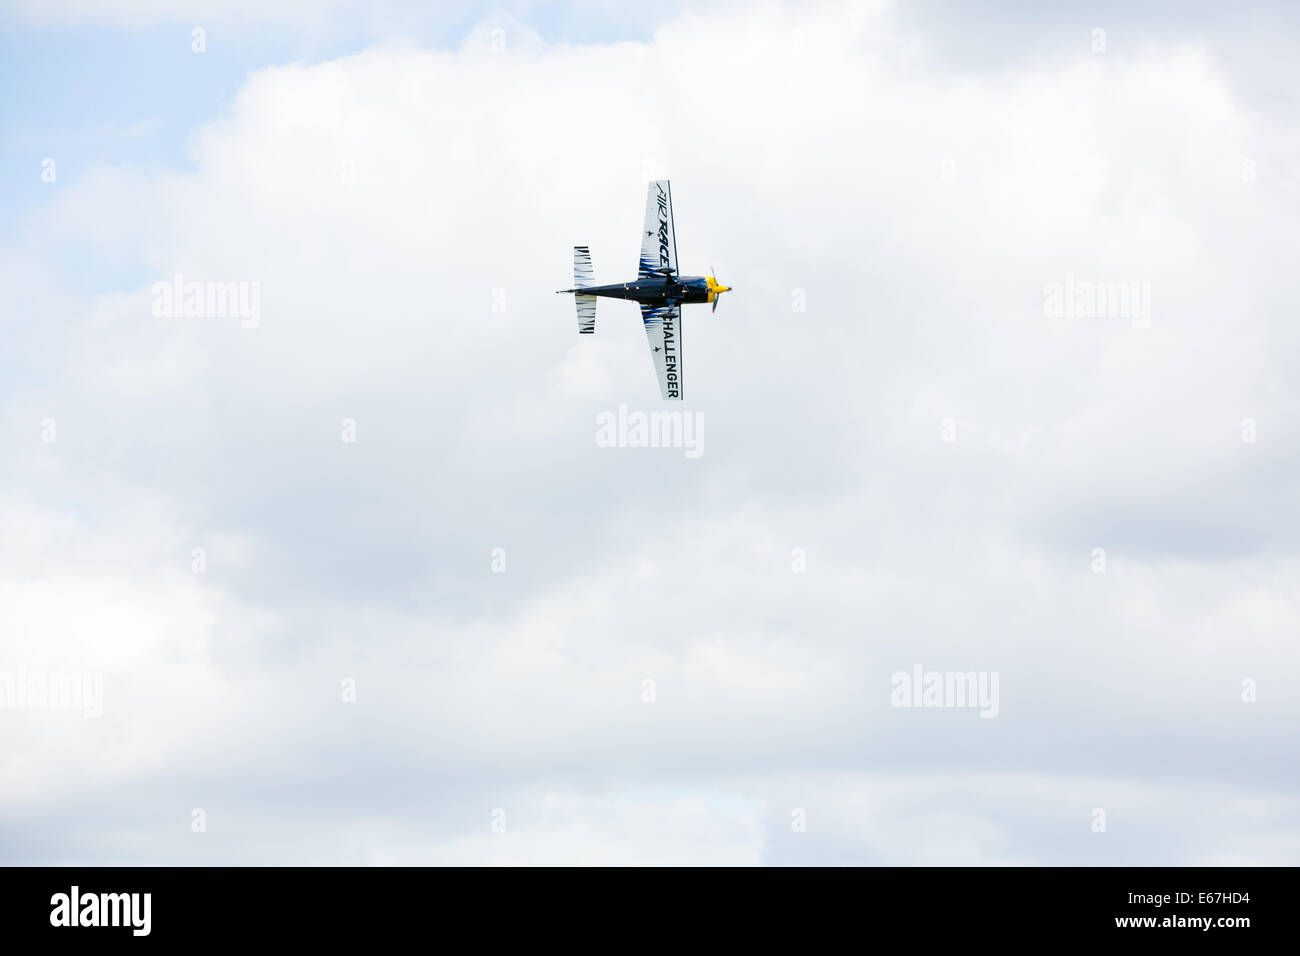 Ascot, UK.  17th July, 2014 Challenger Class Red Bull Aircraft in flight over Ascot during practice session Stock Photo